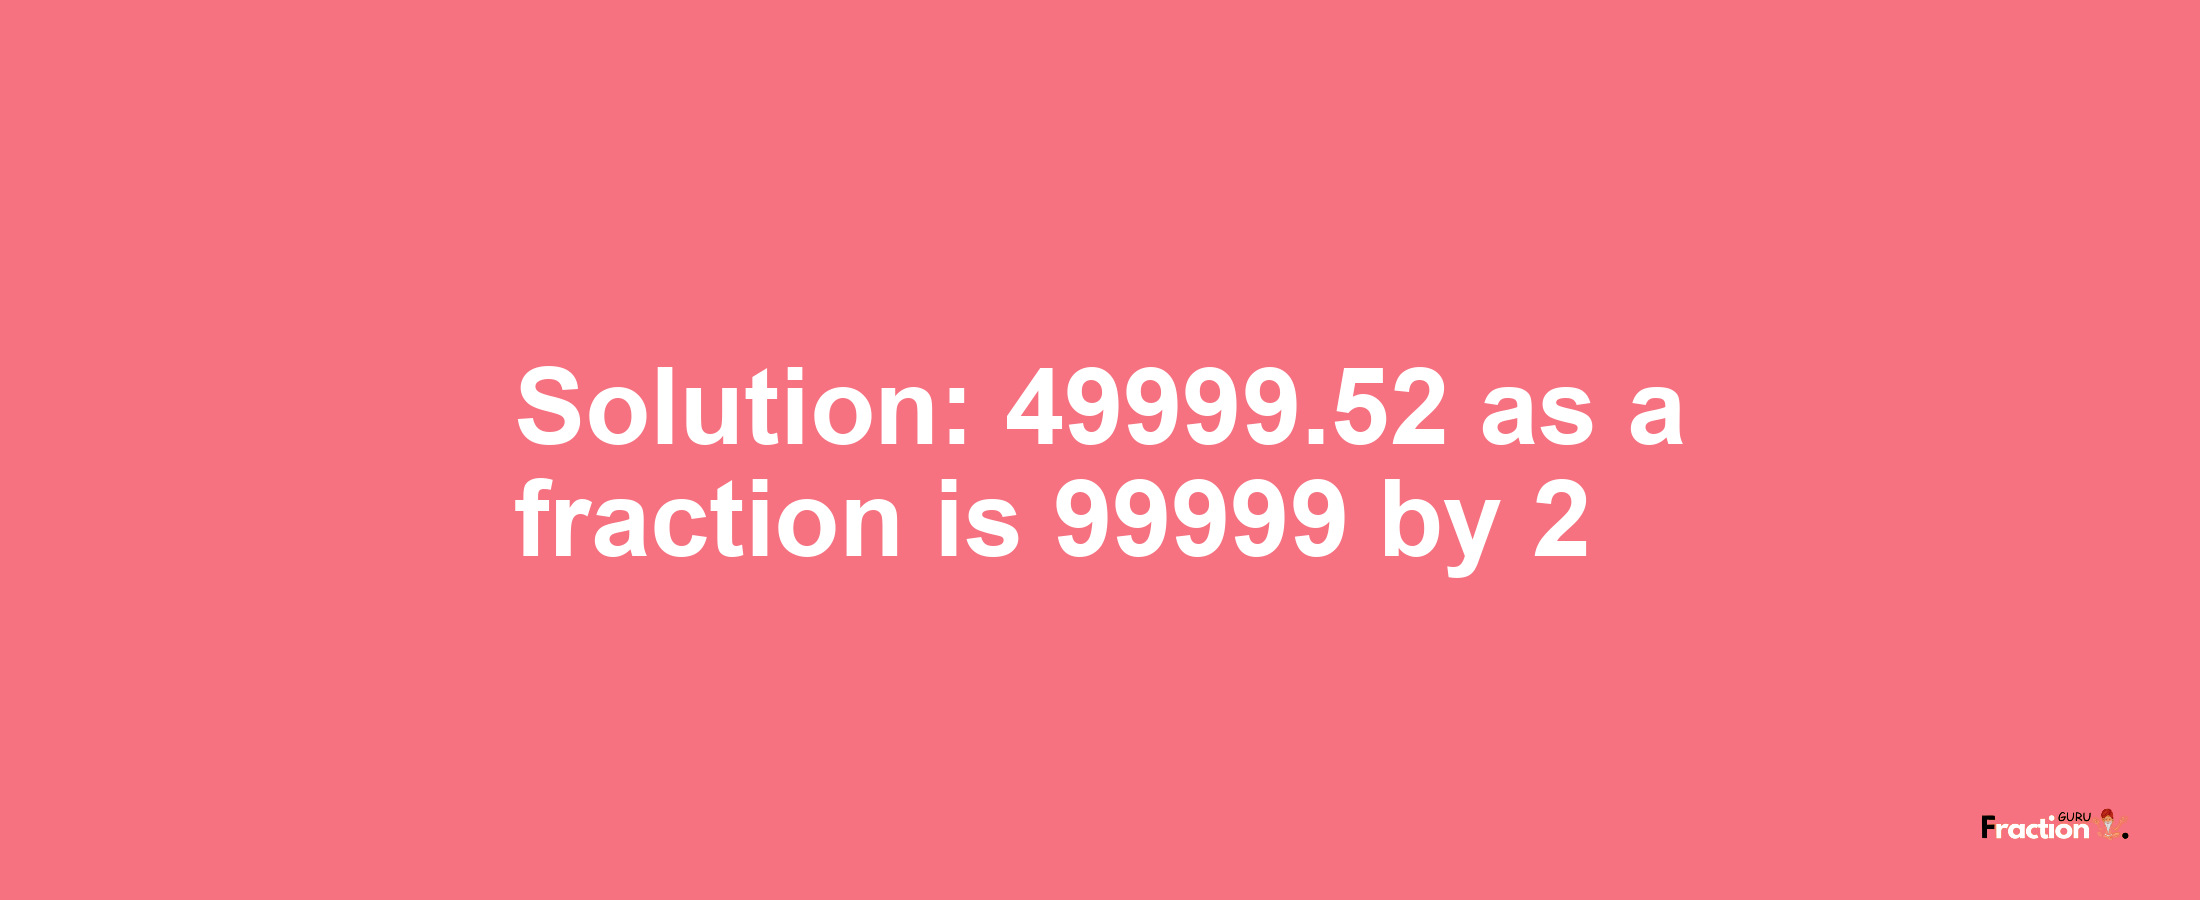 Solution:49999.52 as a fraction is 99999/2